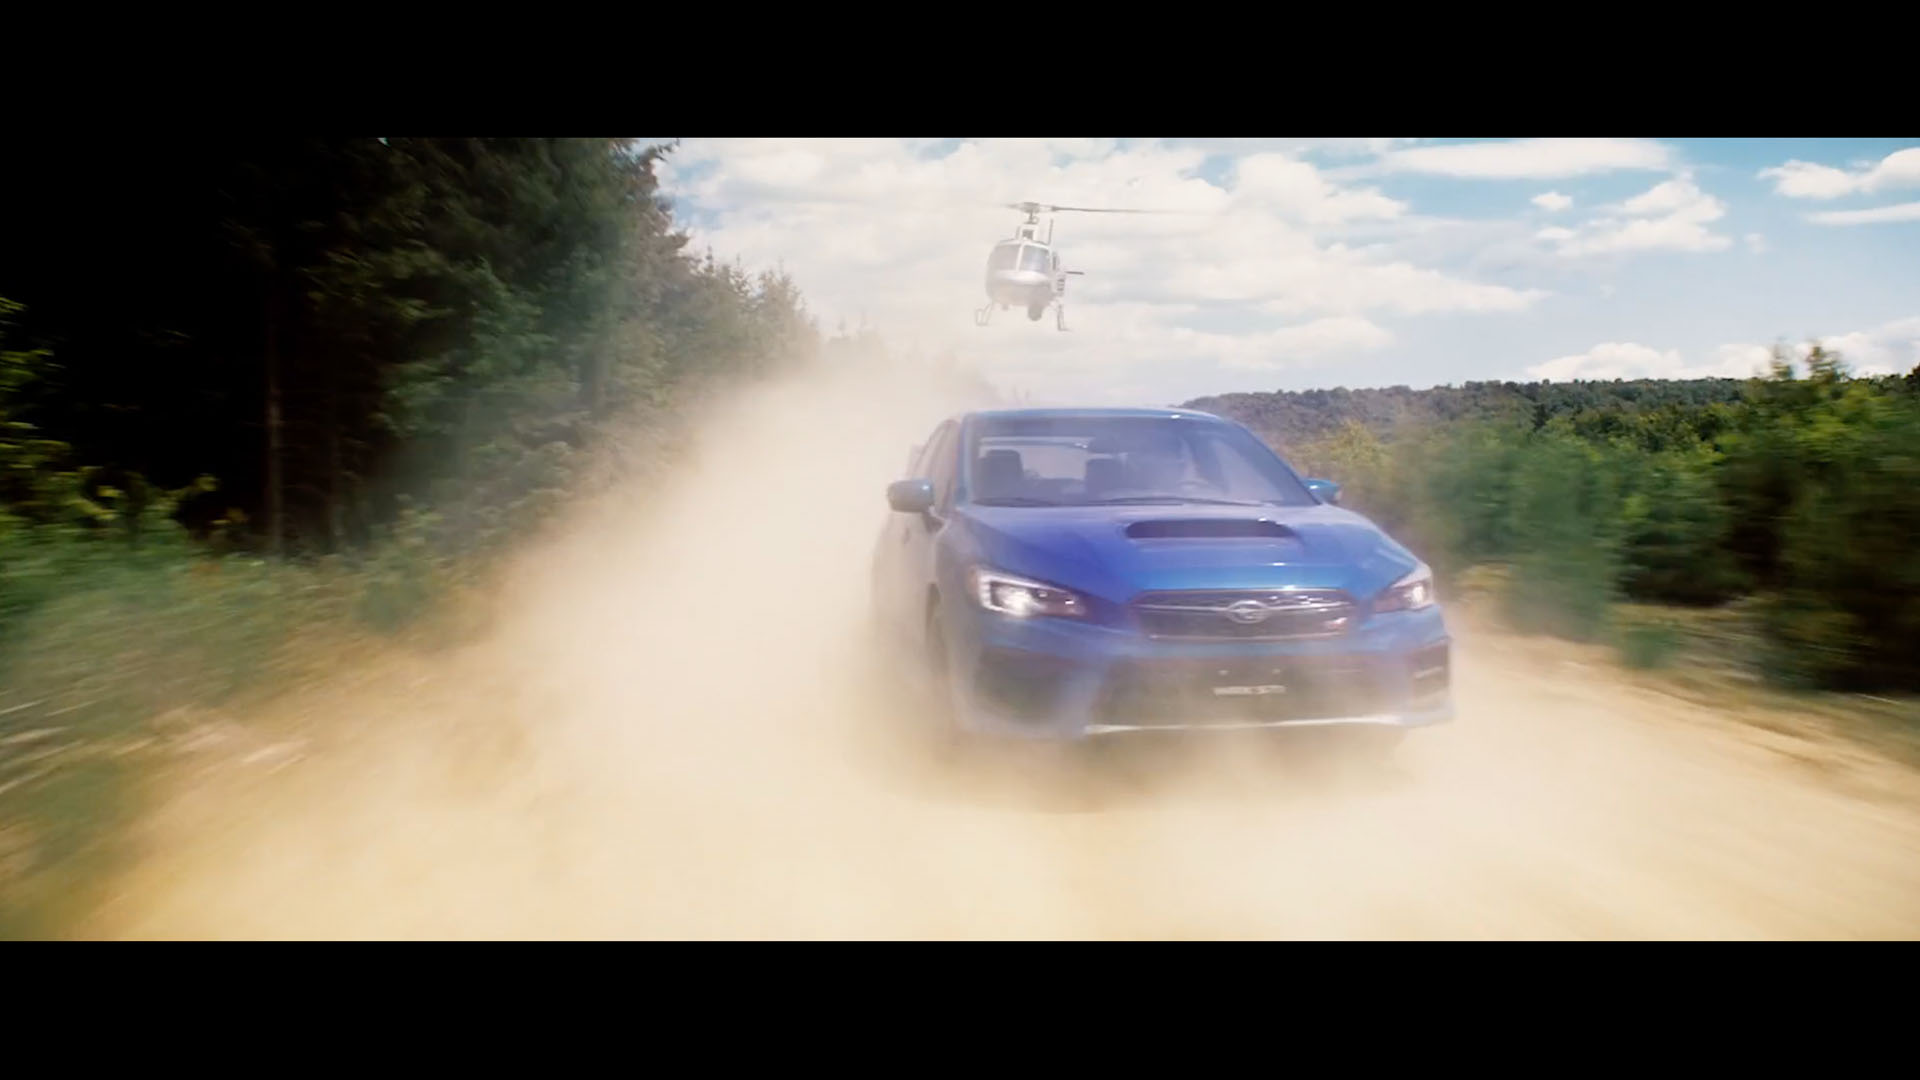 <ul>
<li>TITLE: <strong>WRX STI – Ready from Factory</strong></li>
<li>CLIENT: <strong>SUBARU</strong></li>
<li>STUDIO: <strong>Taylor Reid Creative Agency</strong></li>
<li>DIRECTOR: <strong>Nicholas Taylor</strong></li>
<li>DP: <strong>Paul Reid</strong></li>
<li>TEAM: <strong>Russian Arm Montreal</strong></li>
</ul>
